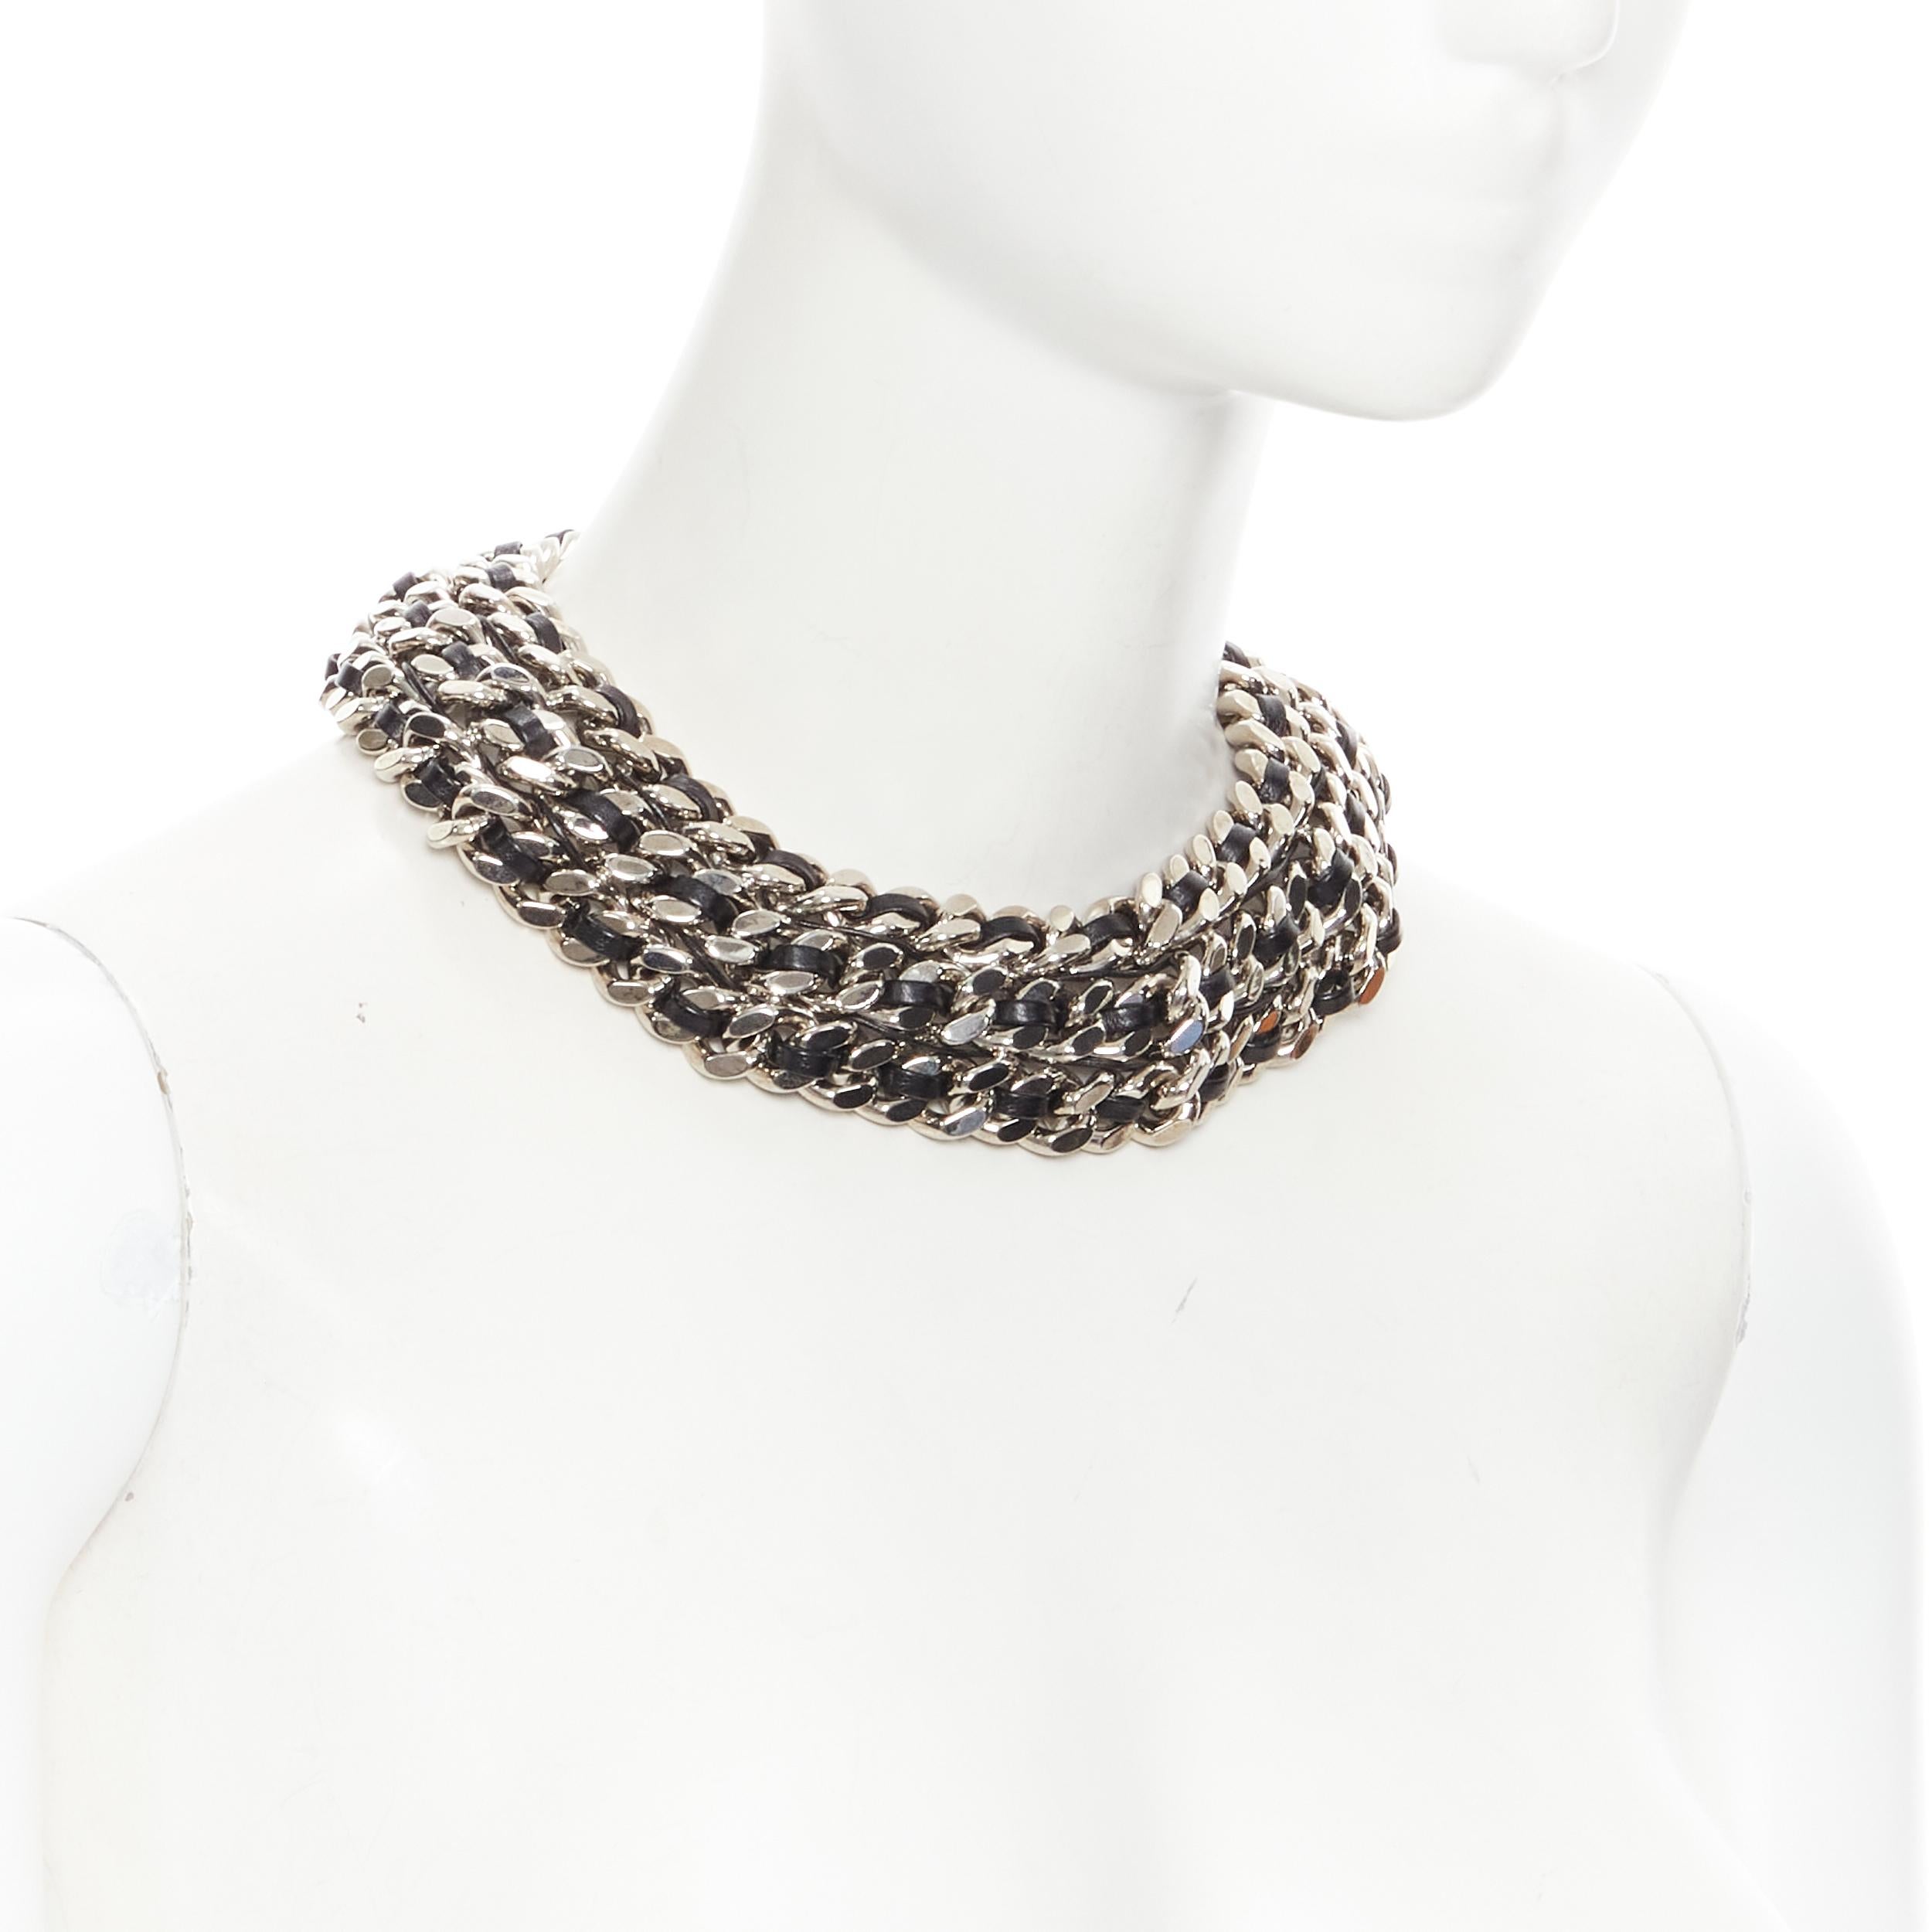 new SAINT LAURENT Hedi Slimane silver chunky chain leather trio collar necklace 
Reference: TGAS/B01689 
Brand: Saint Laurent 
Designer: Hedi Slimane
Material: Metal 
Color: Silver 
Pattern: Solid 
Closure: Clasp 
Extra Detail: Designed by Hedi